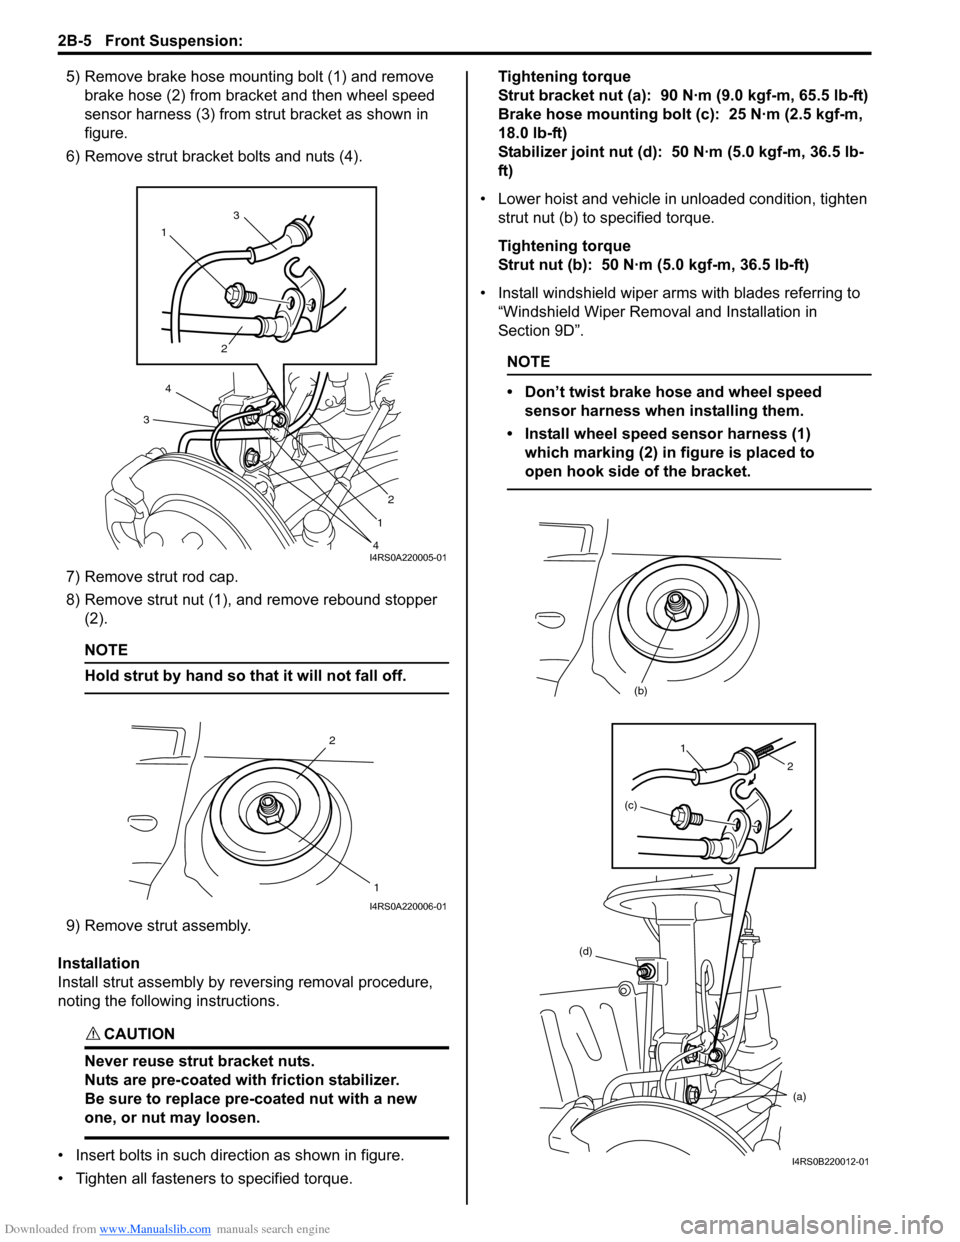 SUZUKI SWIFT 2007 2.G Service User Guide Downloaded from www.Manualslib.com manuals search engine 2B-5 Front Suspension: 
5) Remove brake hose mounting bolt (1) and remove brake hose (2) from bracket and then wheel speed 
sensor harness (3) 